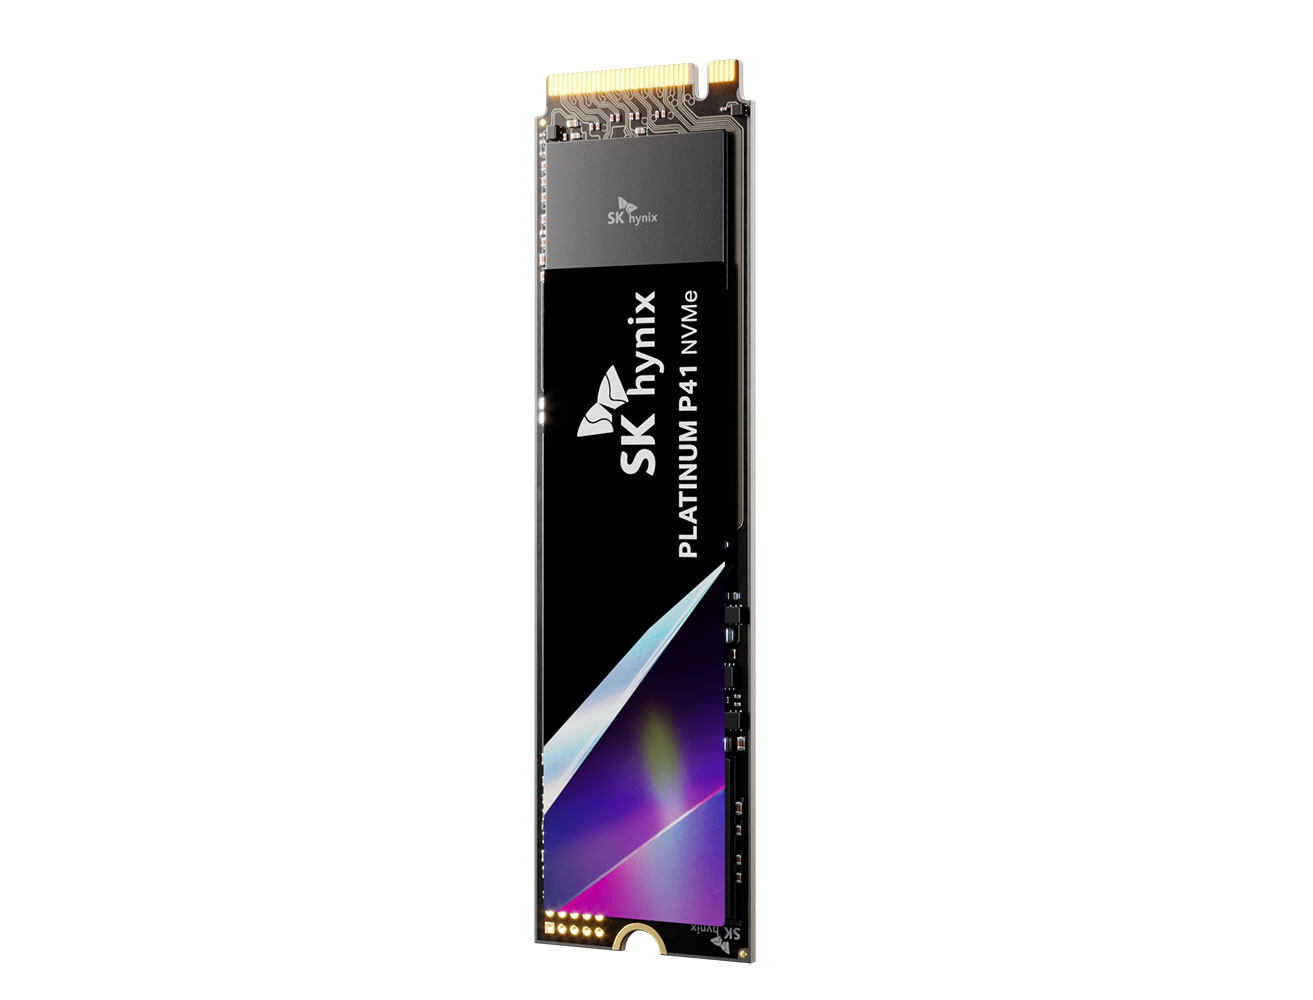 SK hynix Platinum P41 2 TB PCIe 4.0 NVMe SSD Review - Runs Hot, But That's  Okay States Manufacturer